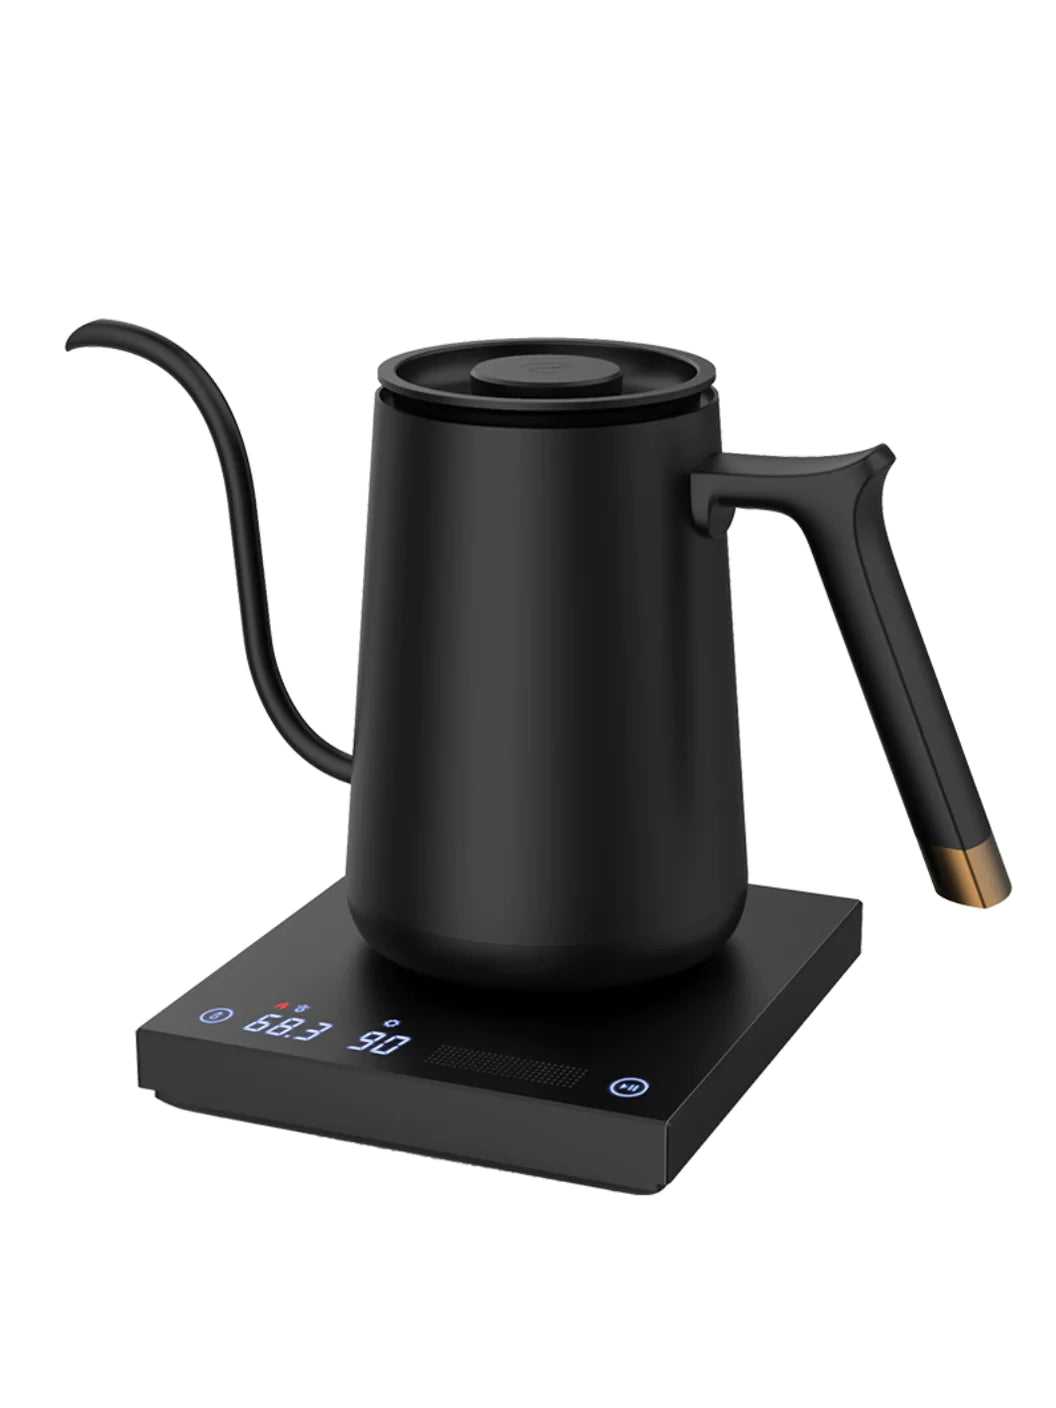 TIMEMORE Fish Electric Pourover Kettle 800ml - Image 3